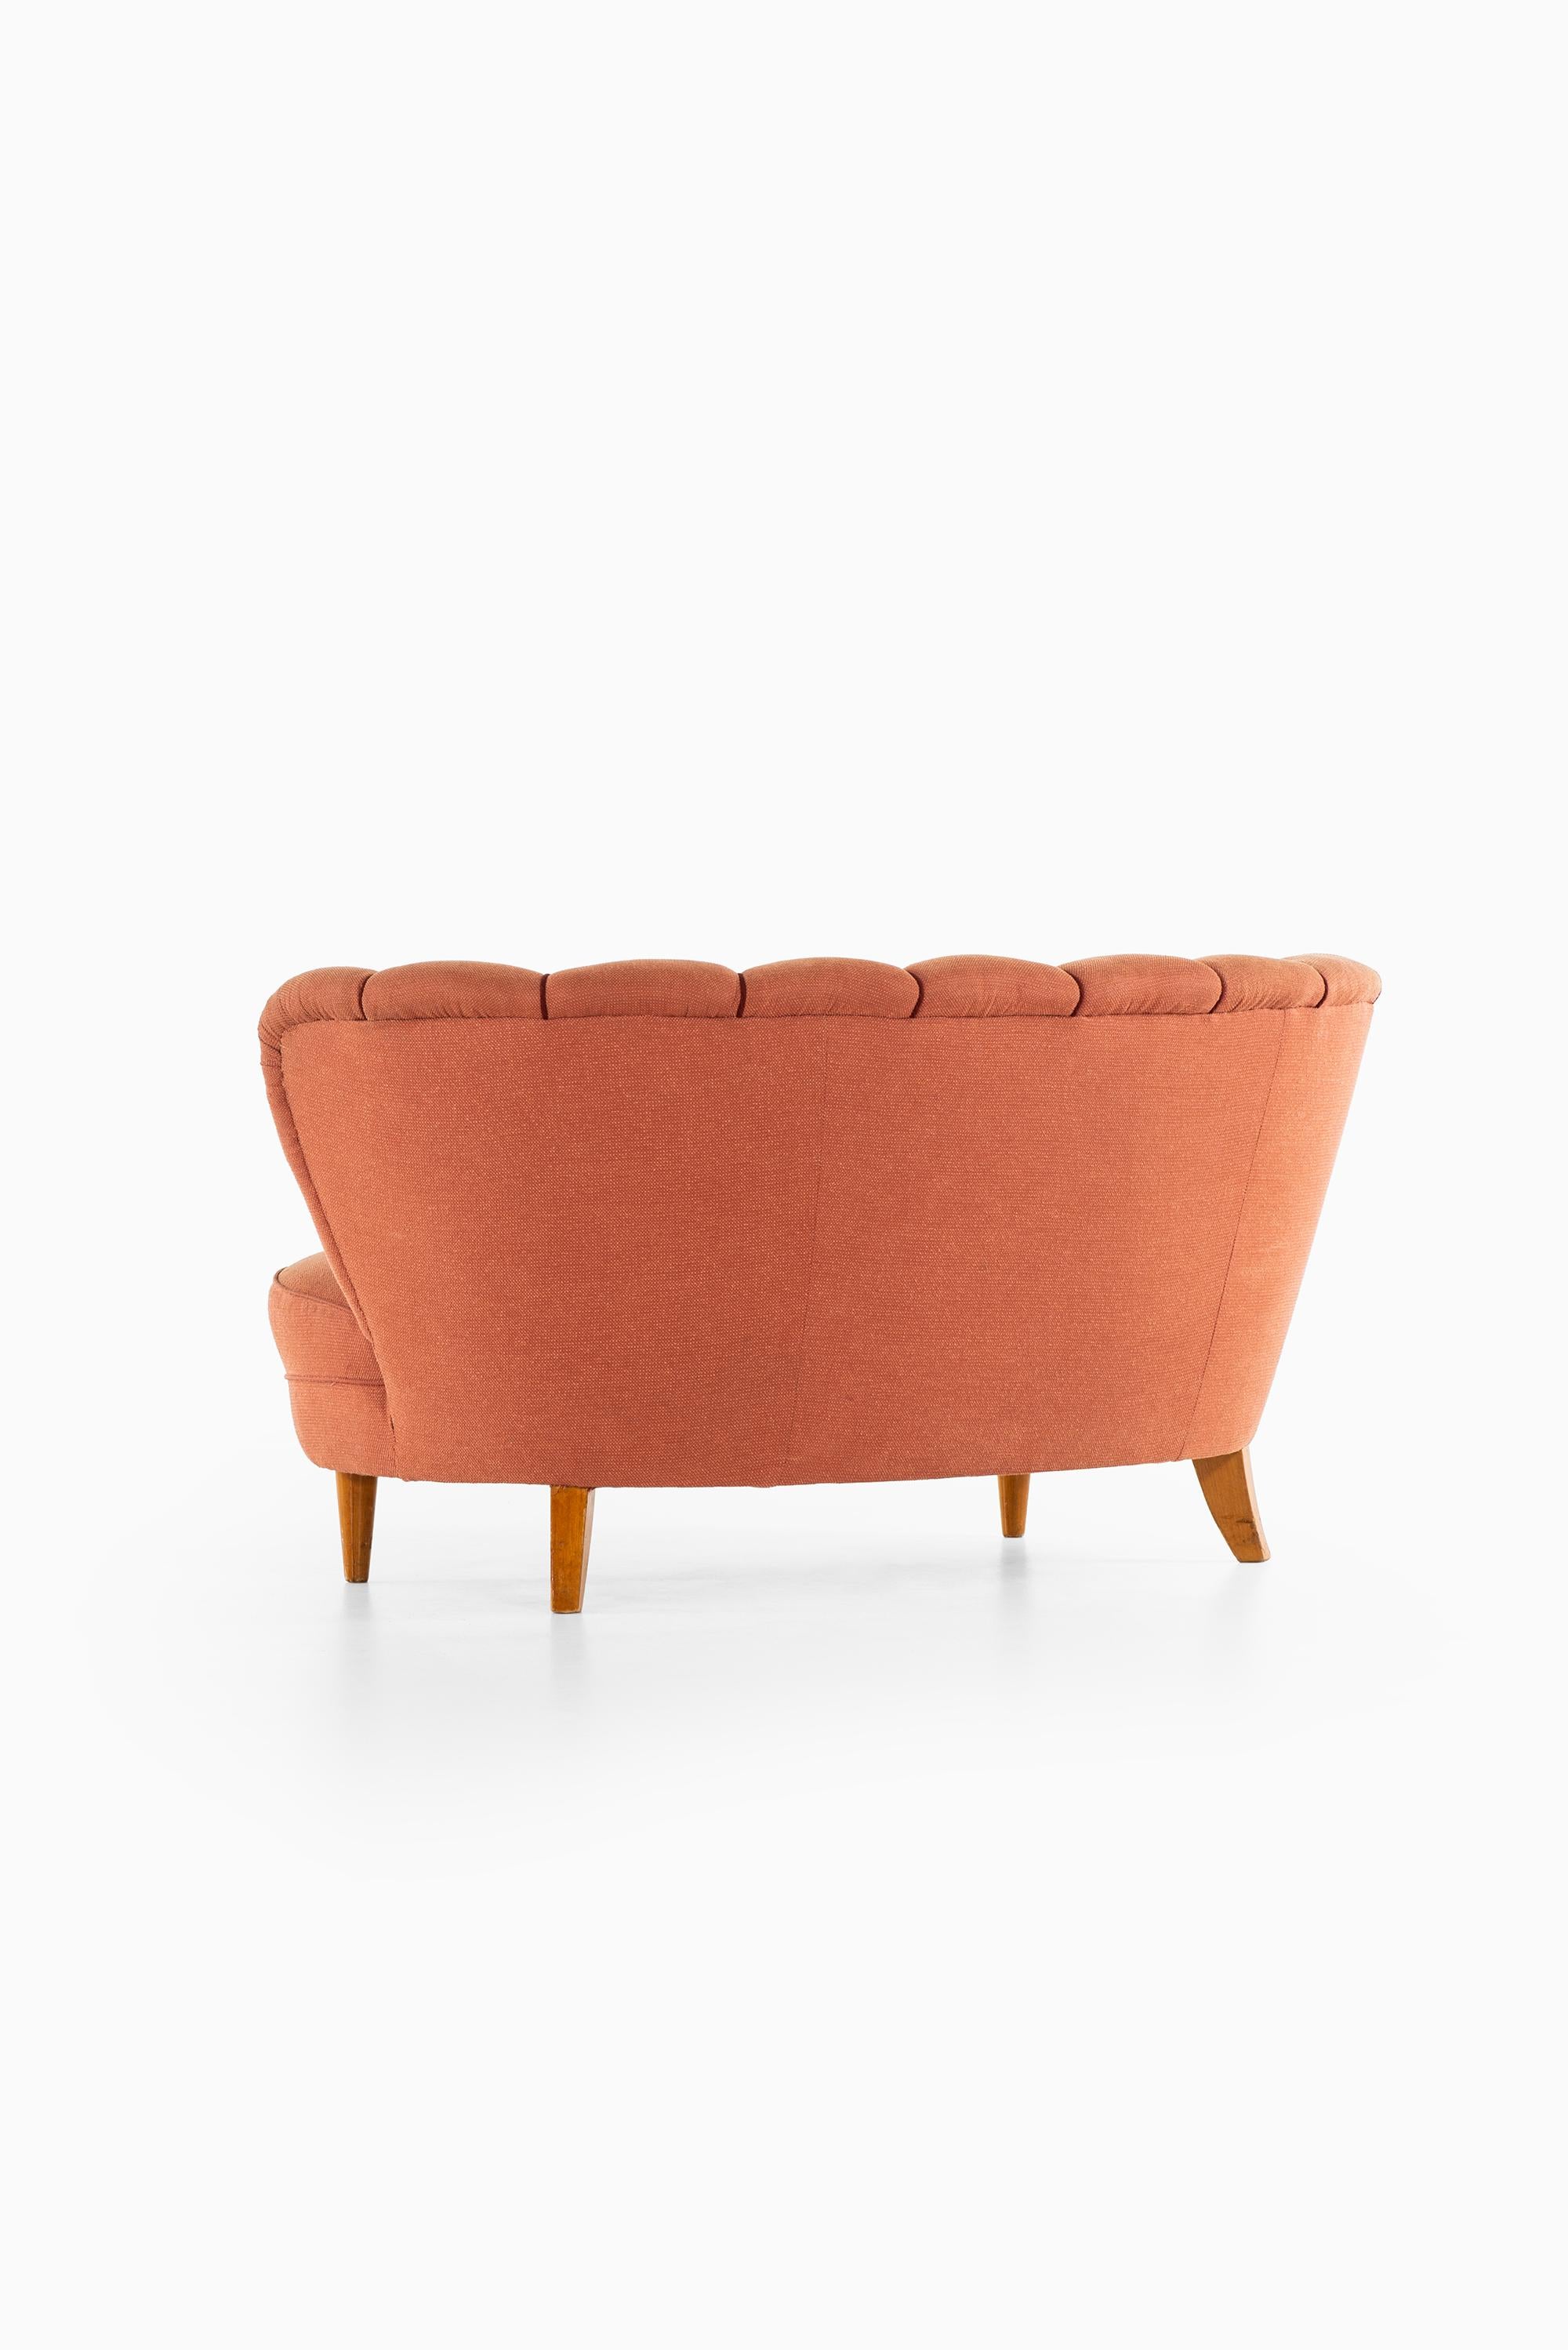 Scandinavian Modern Sofa in the Manner of Otto Schulz Produced in Sweden